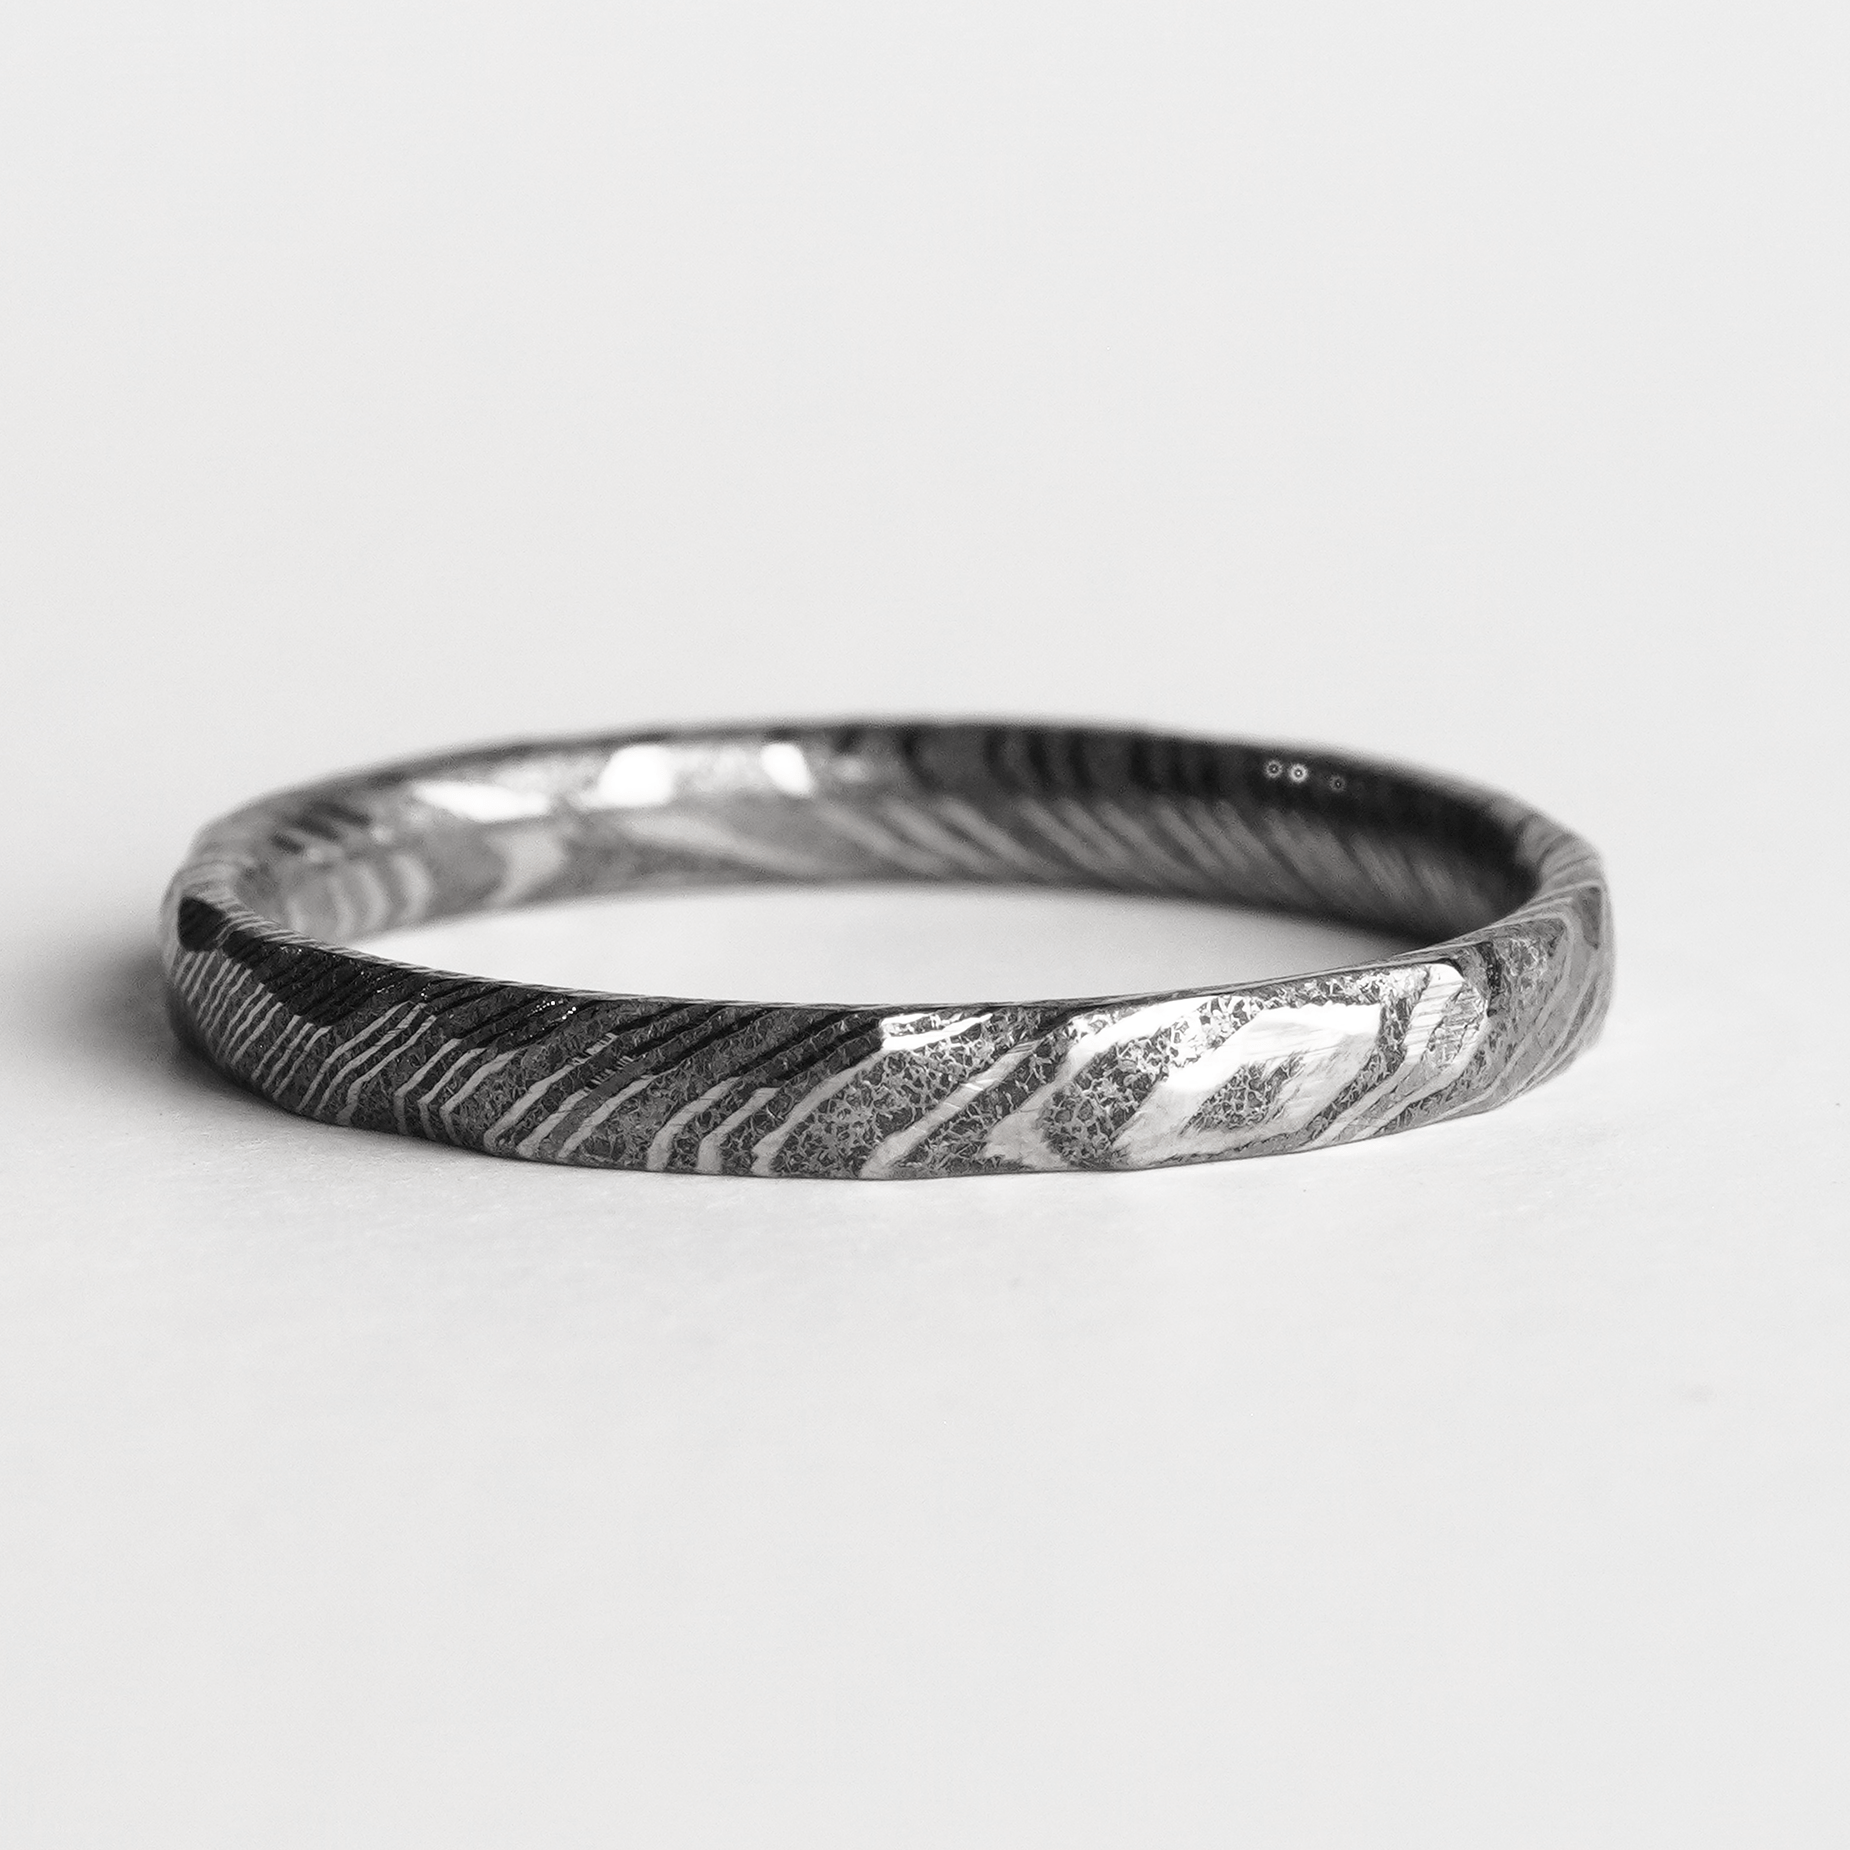 The Rory - Men's Wedding Rings - Manly Bands